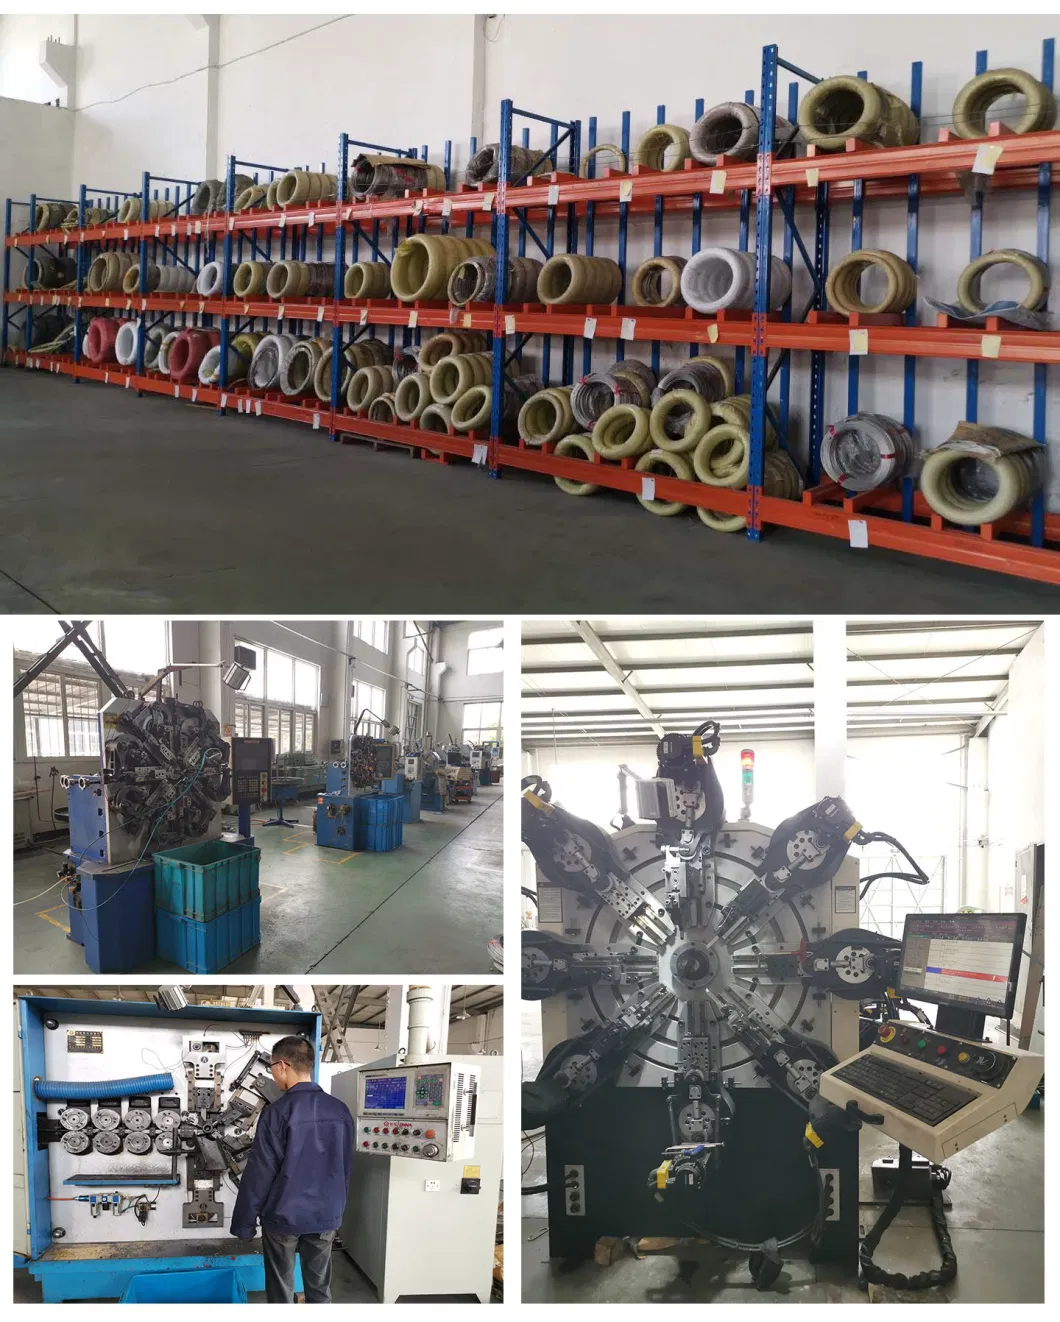 Factory Custom Anti-Vibration Isolator Spring Mounts for HVAC System Using in Pump and Air Conditioner